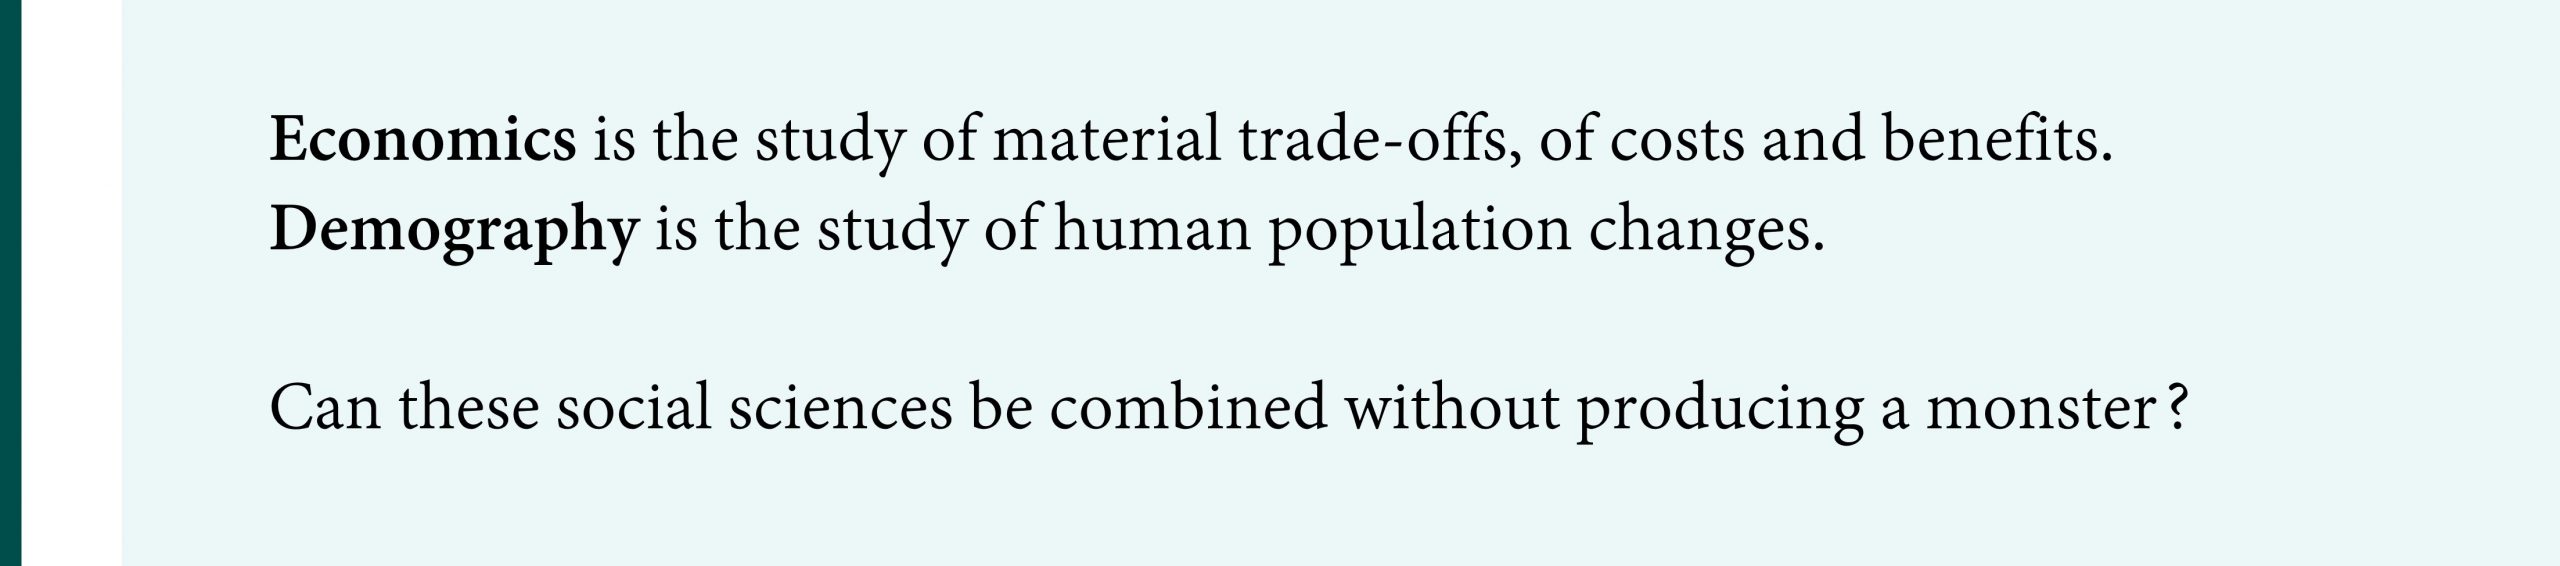 Economics is the study of material trade-offs, of costs and benefits.  Demography is the study of human population changes.  Can these social sciences be combined without producing a monster?